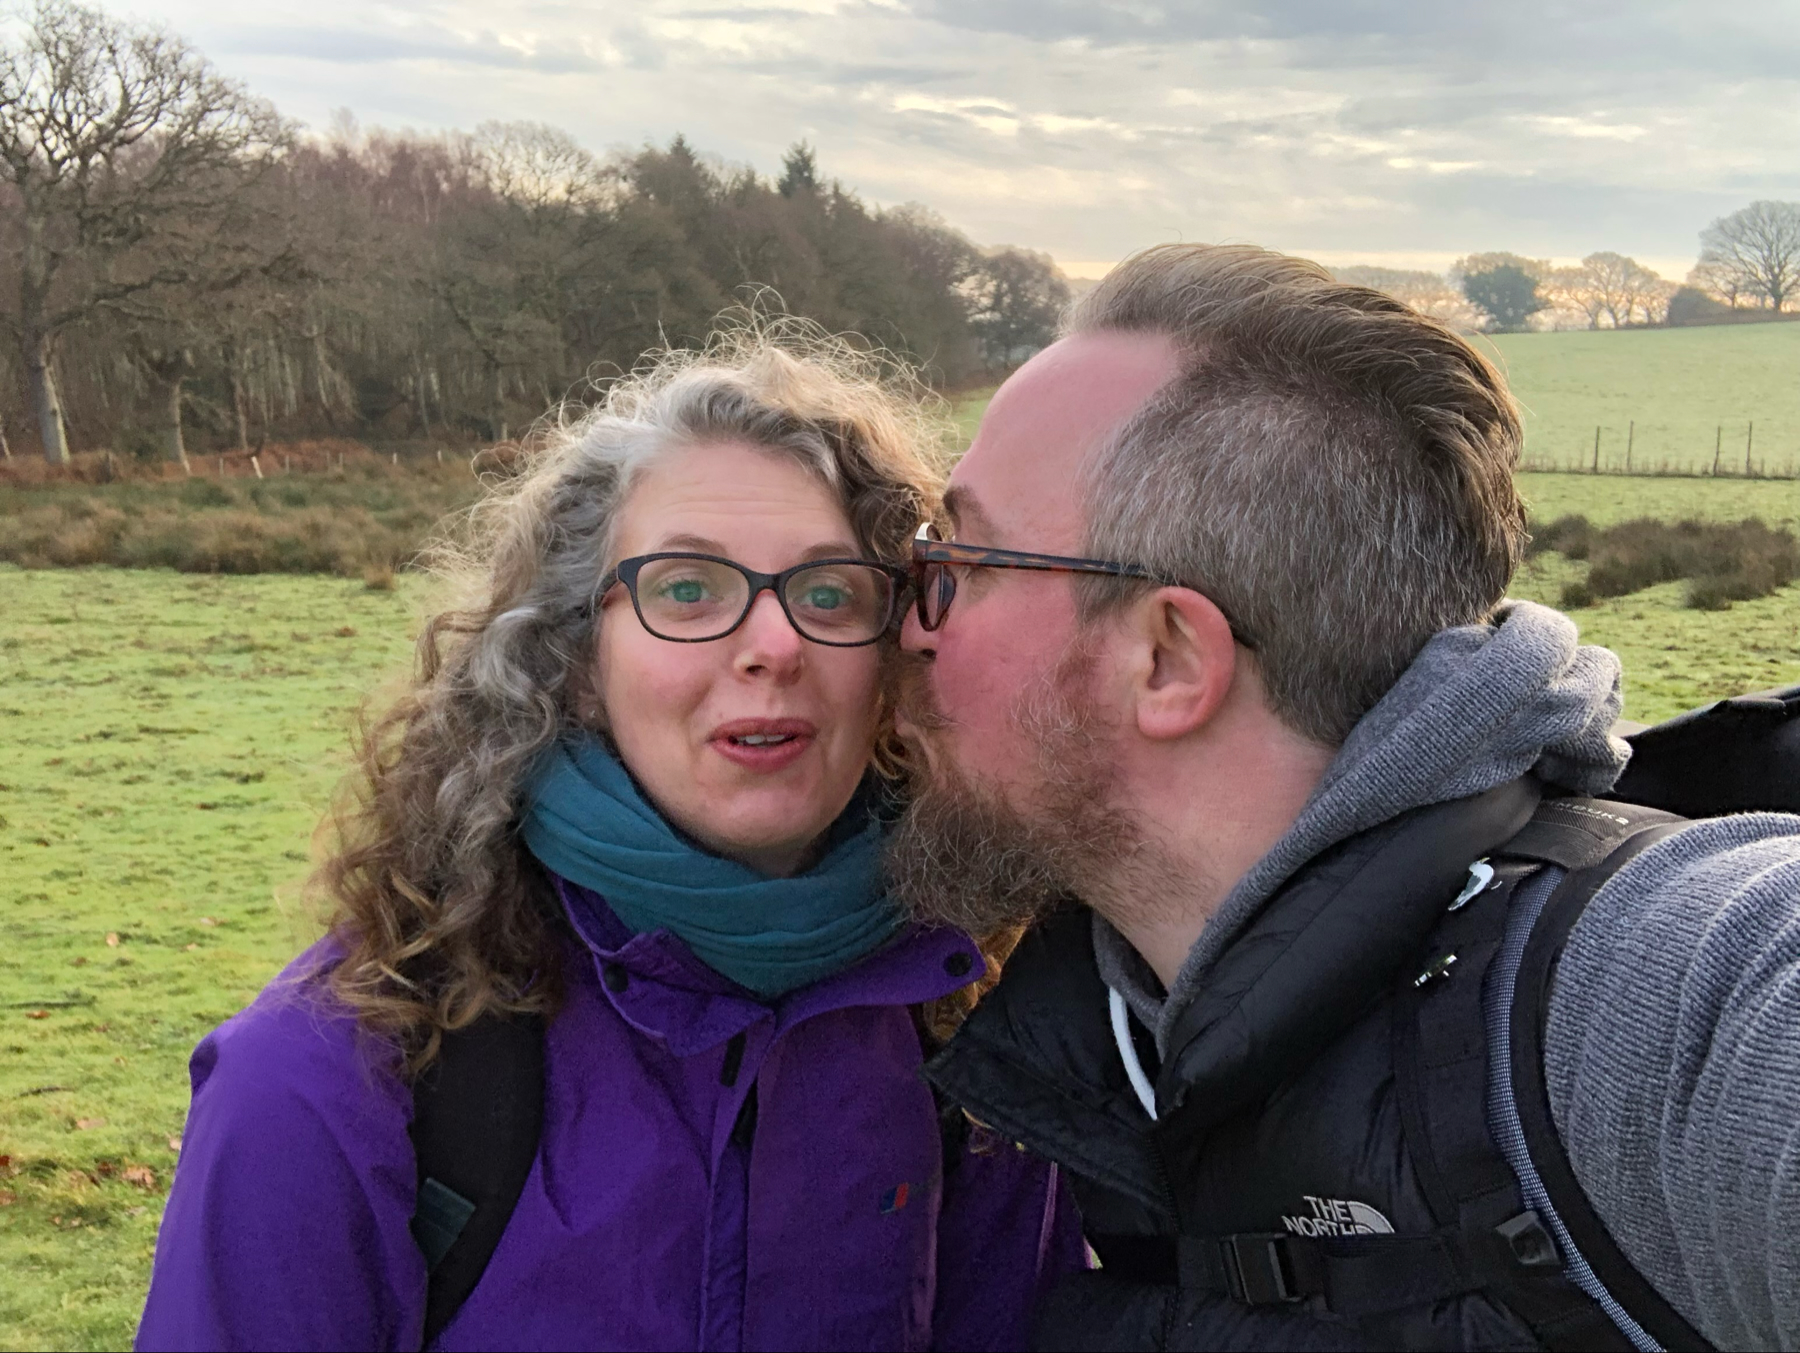 Me kissing my wife on the cheek as she looks surprised!